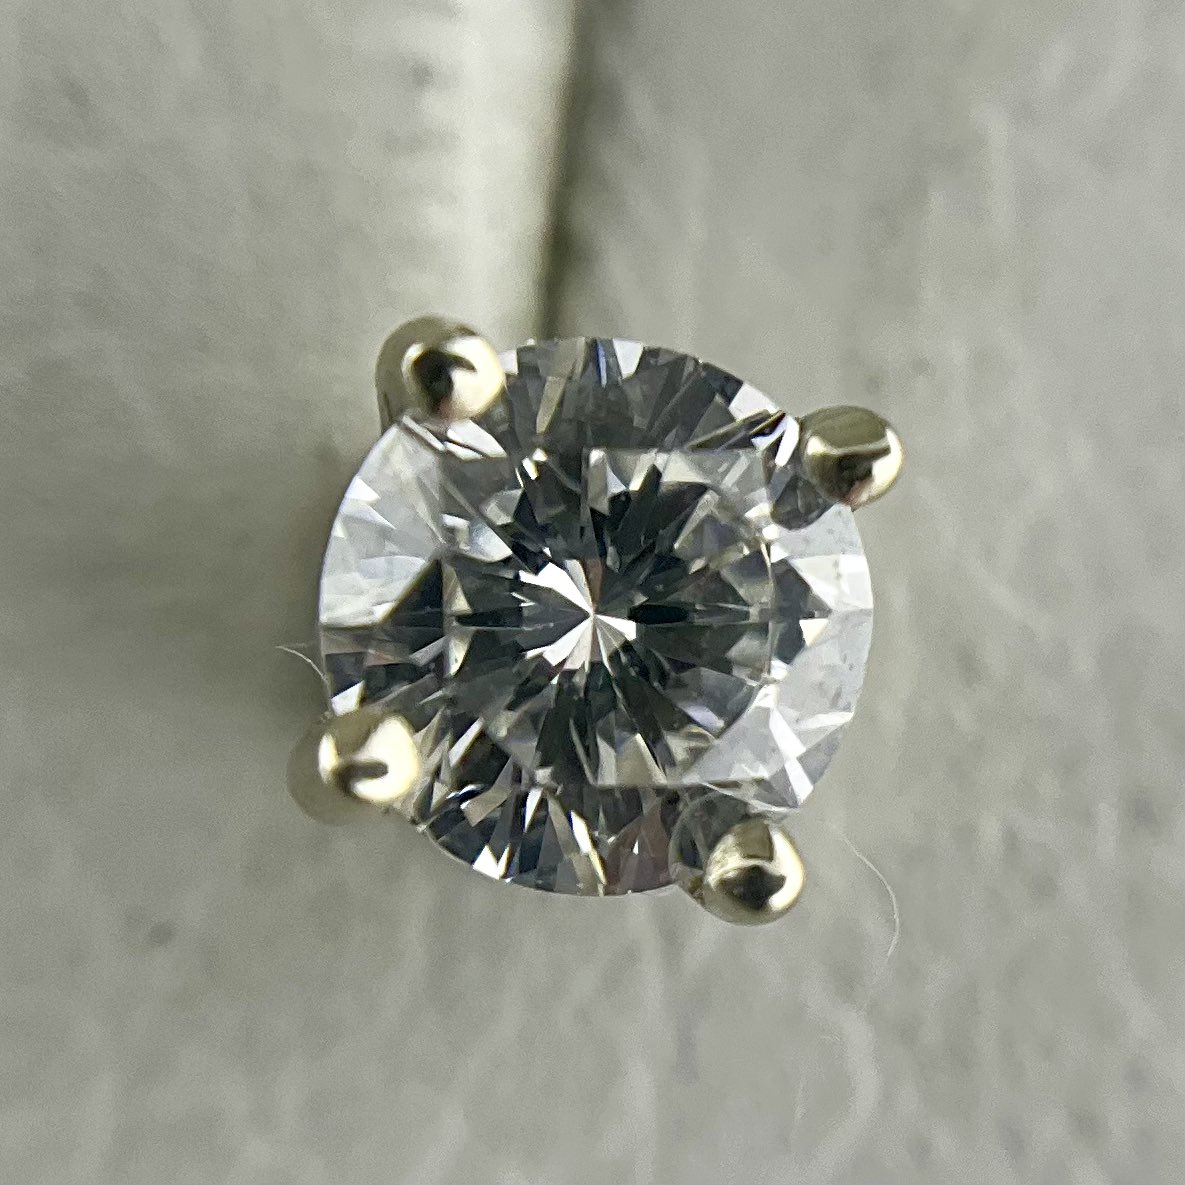 Available now! Diamond stud earrings in 1.0 grams of 14k white gold! Features 2 diamonds for .40 ctw! Regularly priced at $599.99 but currently 40% off. Take them home for only $396 out the door!   #pawnshop #oakland #bestcollateral #whitegold #diamondstuds #diamondstudearrings